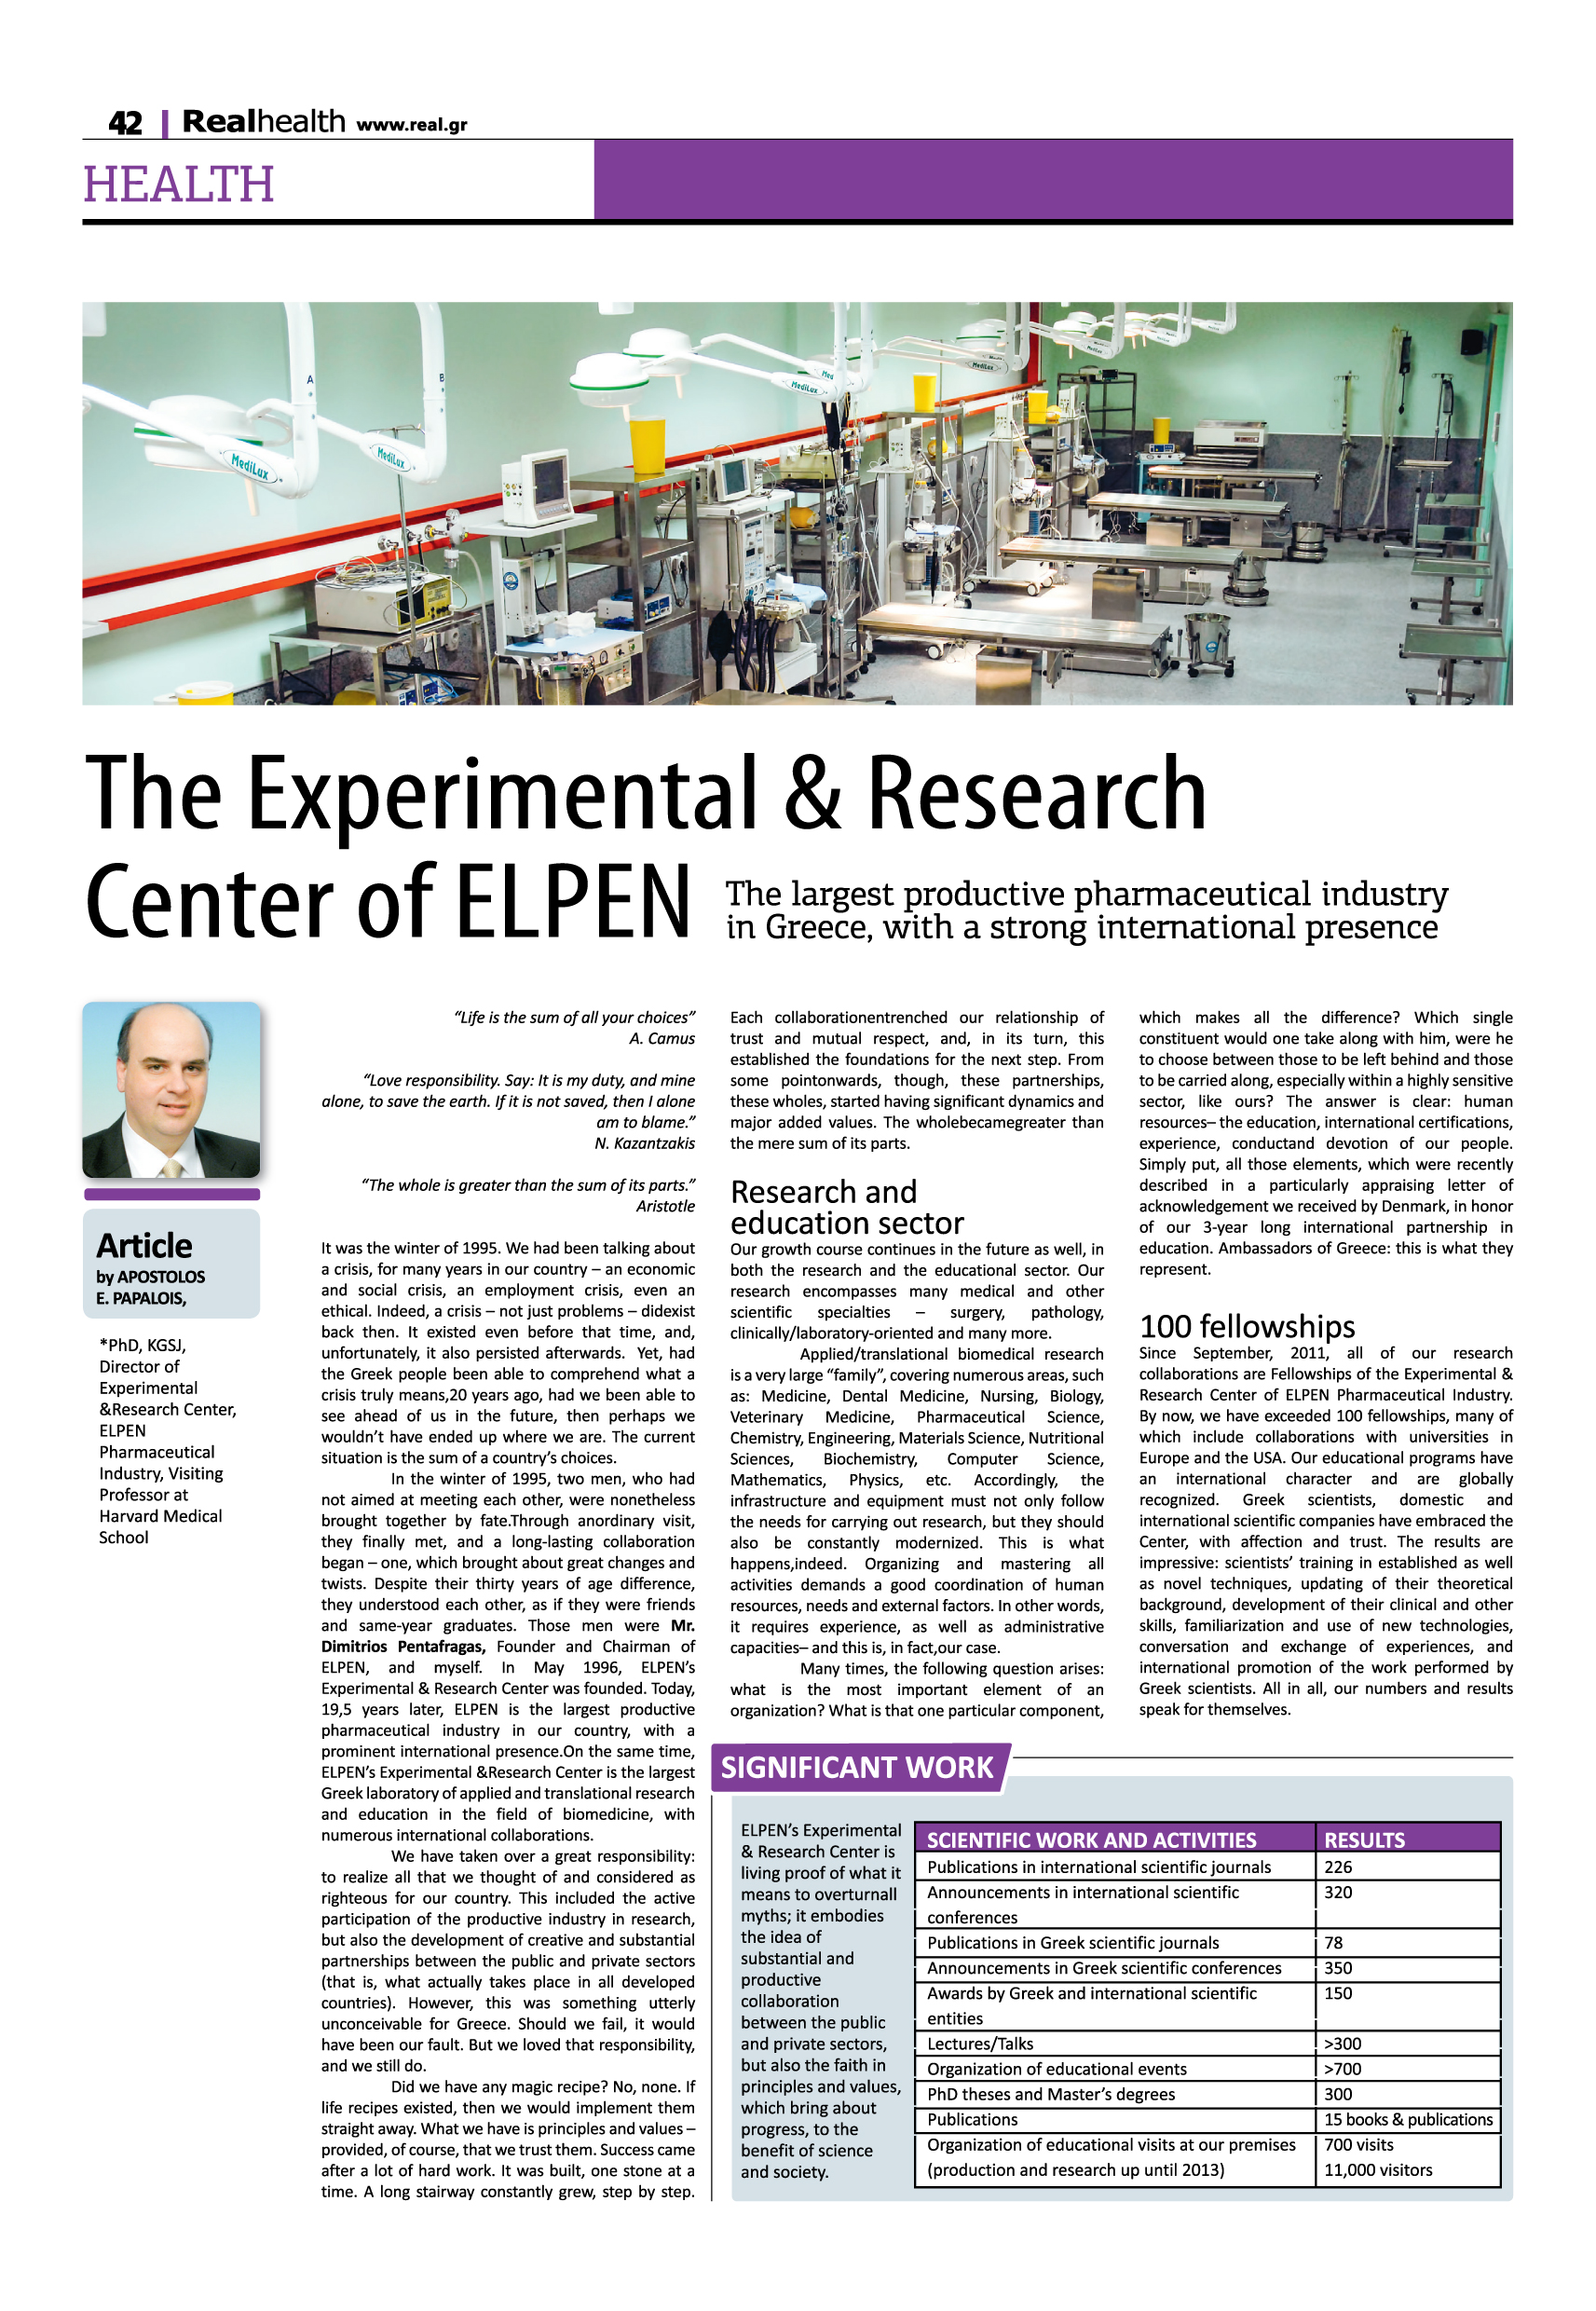 The Experimental & Research Center of ELPEN The largest productive pharmaceutical industry in Greece, with a strong international presence